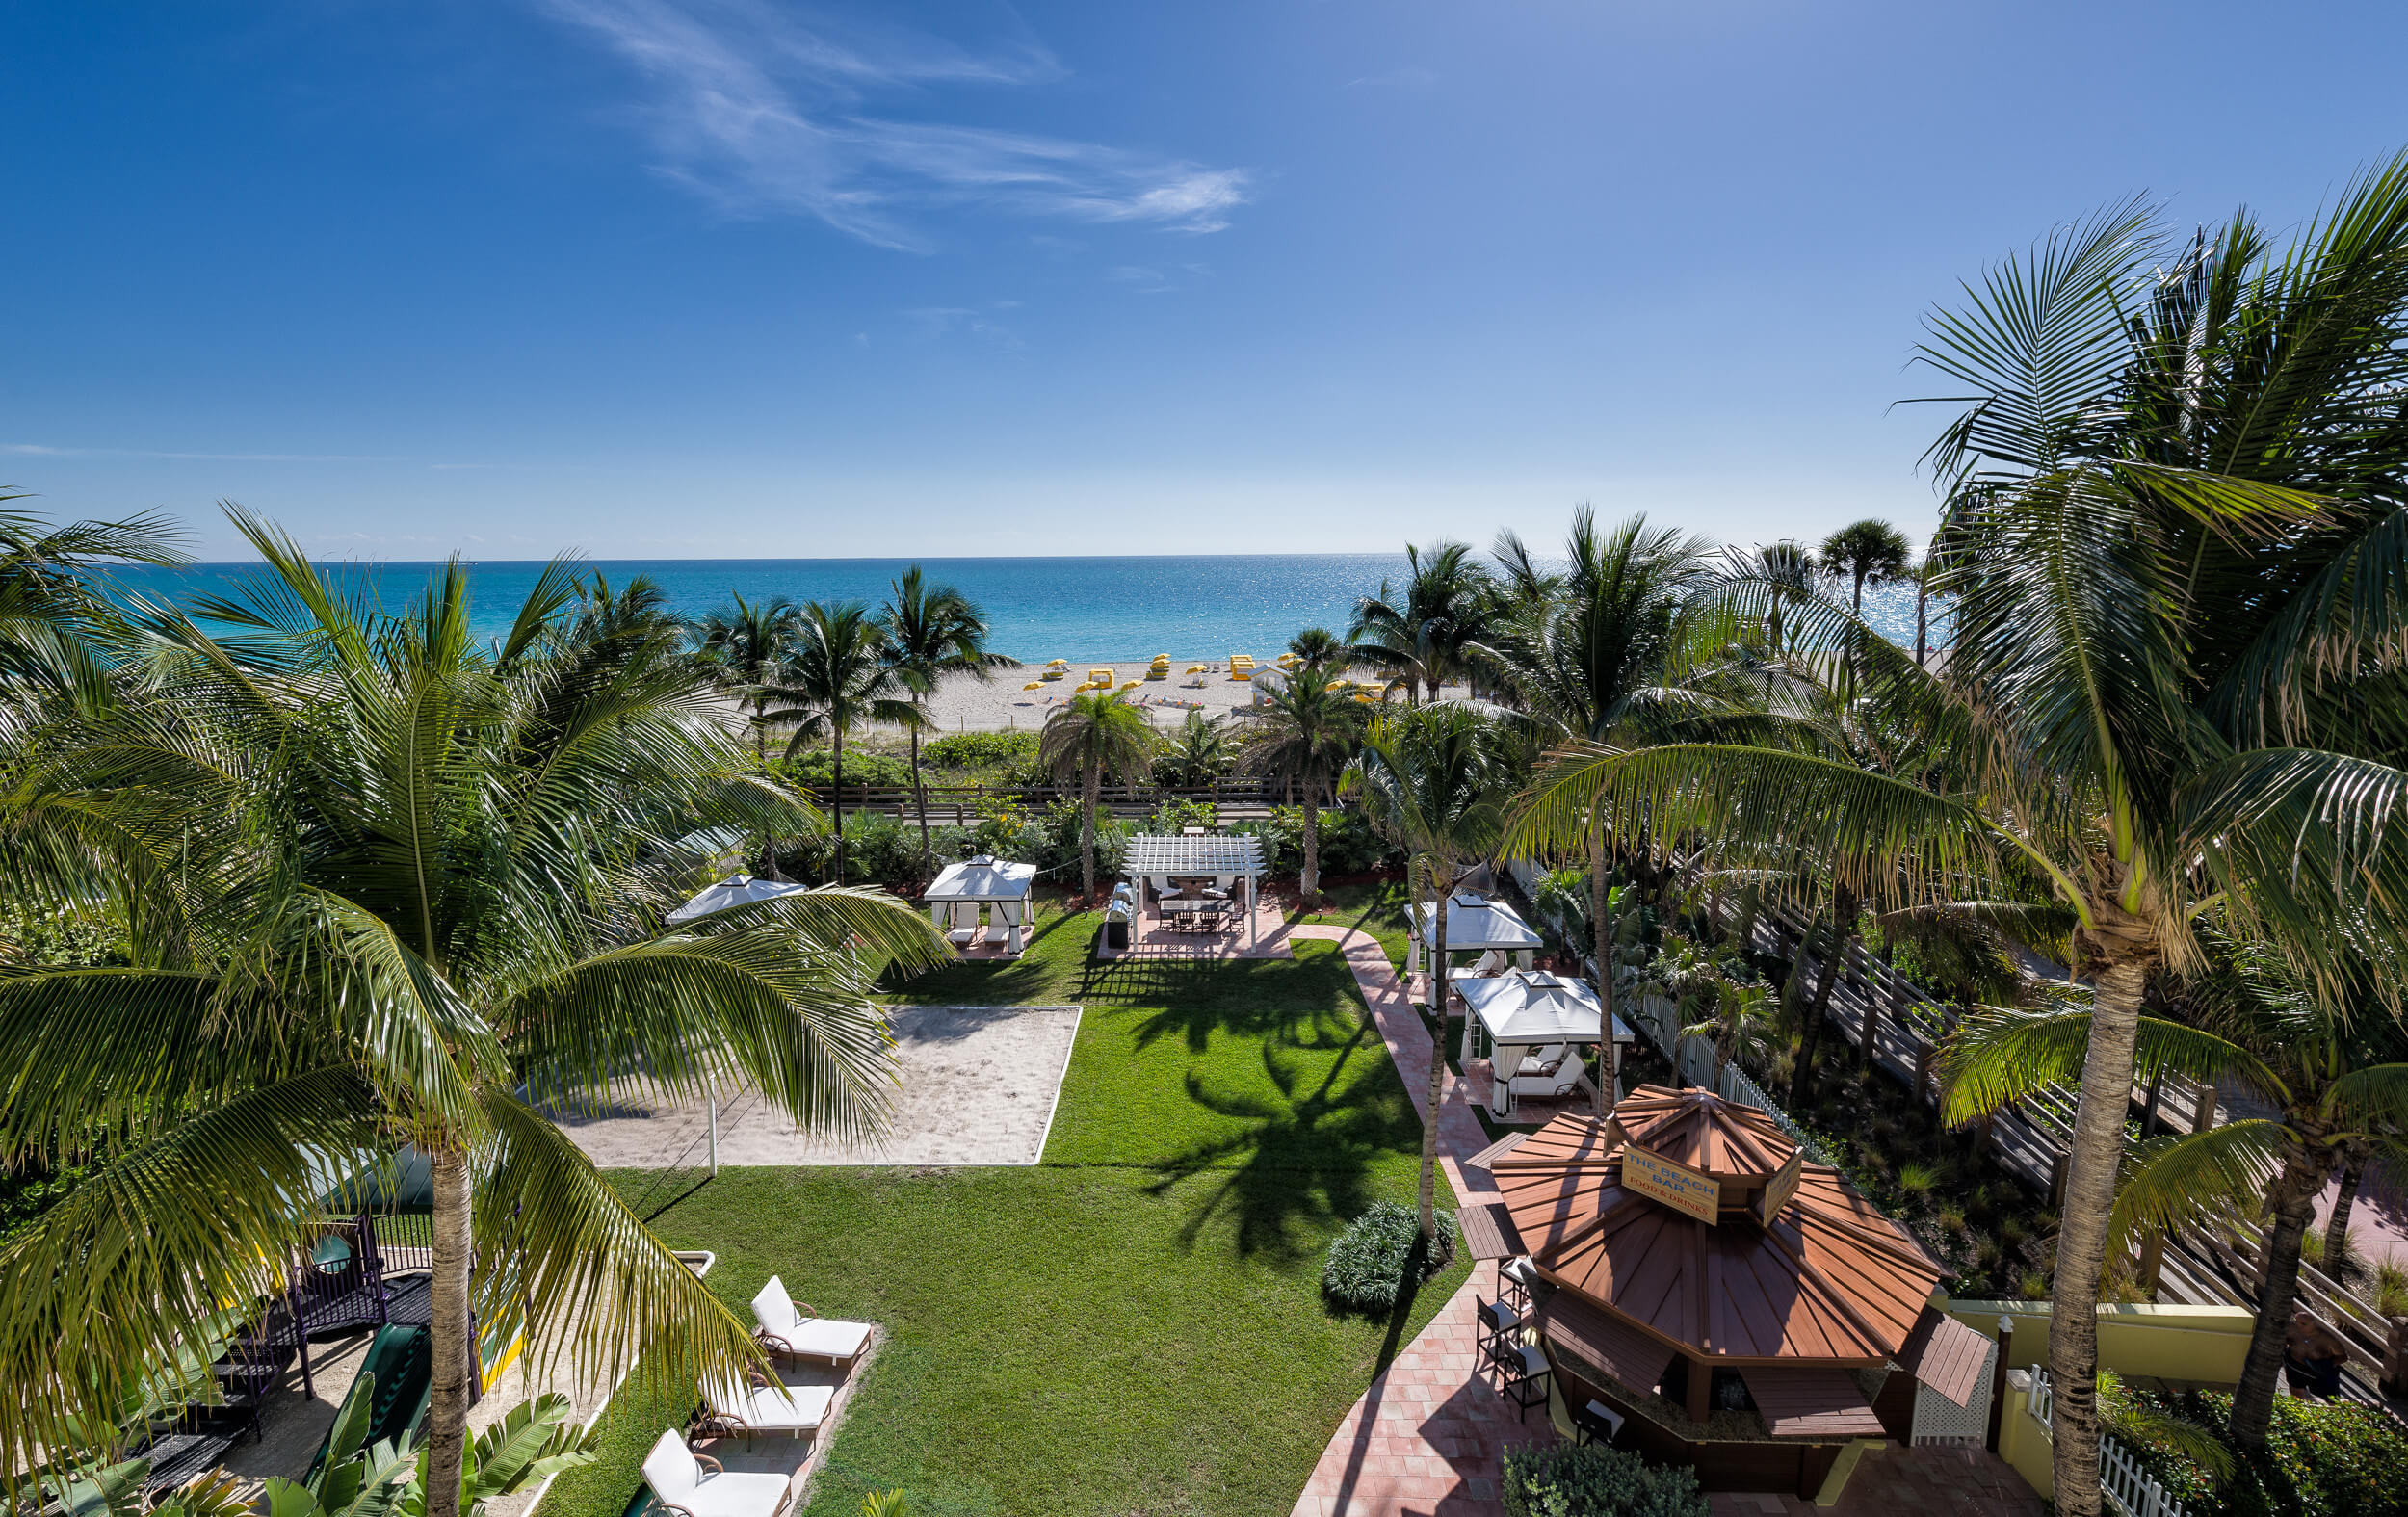 Resort grounds with volleyball court, beach bar and private cabanas | Westgate South Beach Oceanfront Resort